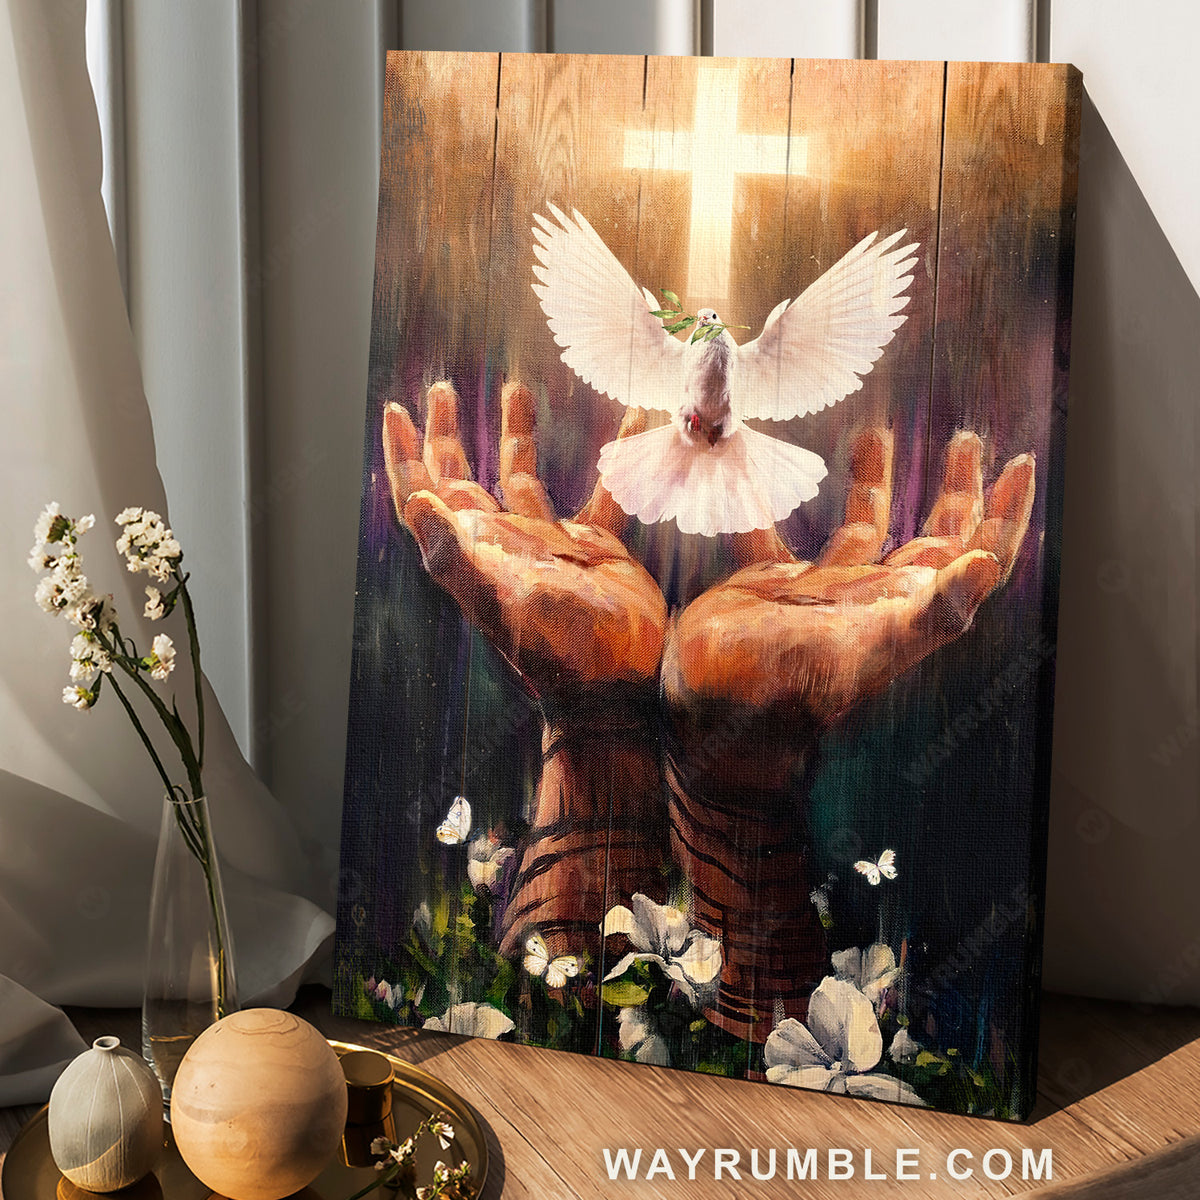 Holy Spirit White Dove Picture Religious Wall Art for Home Decor 1 